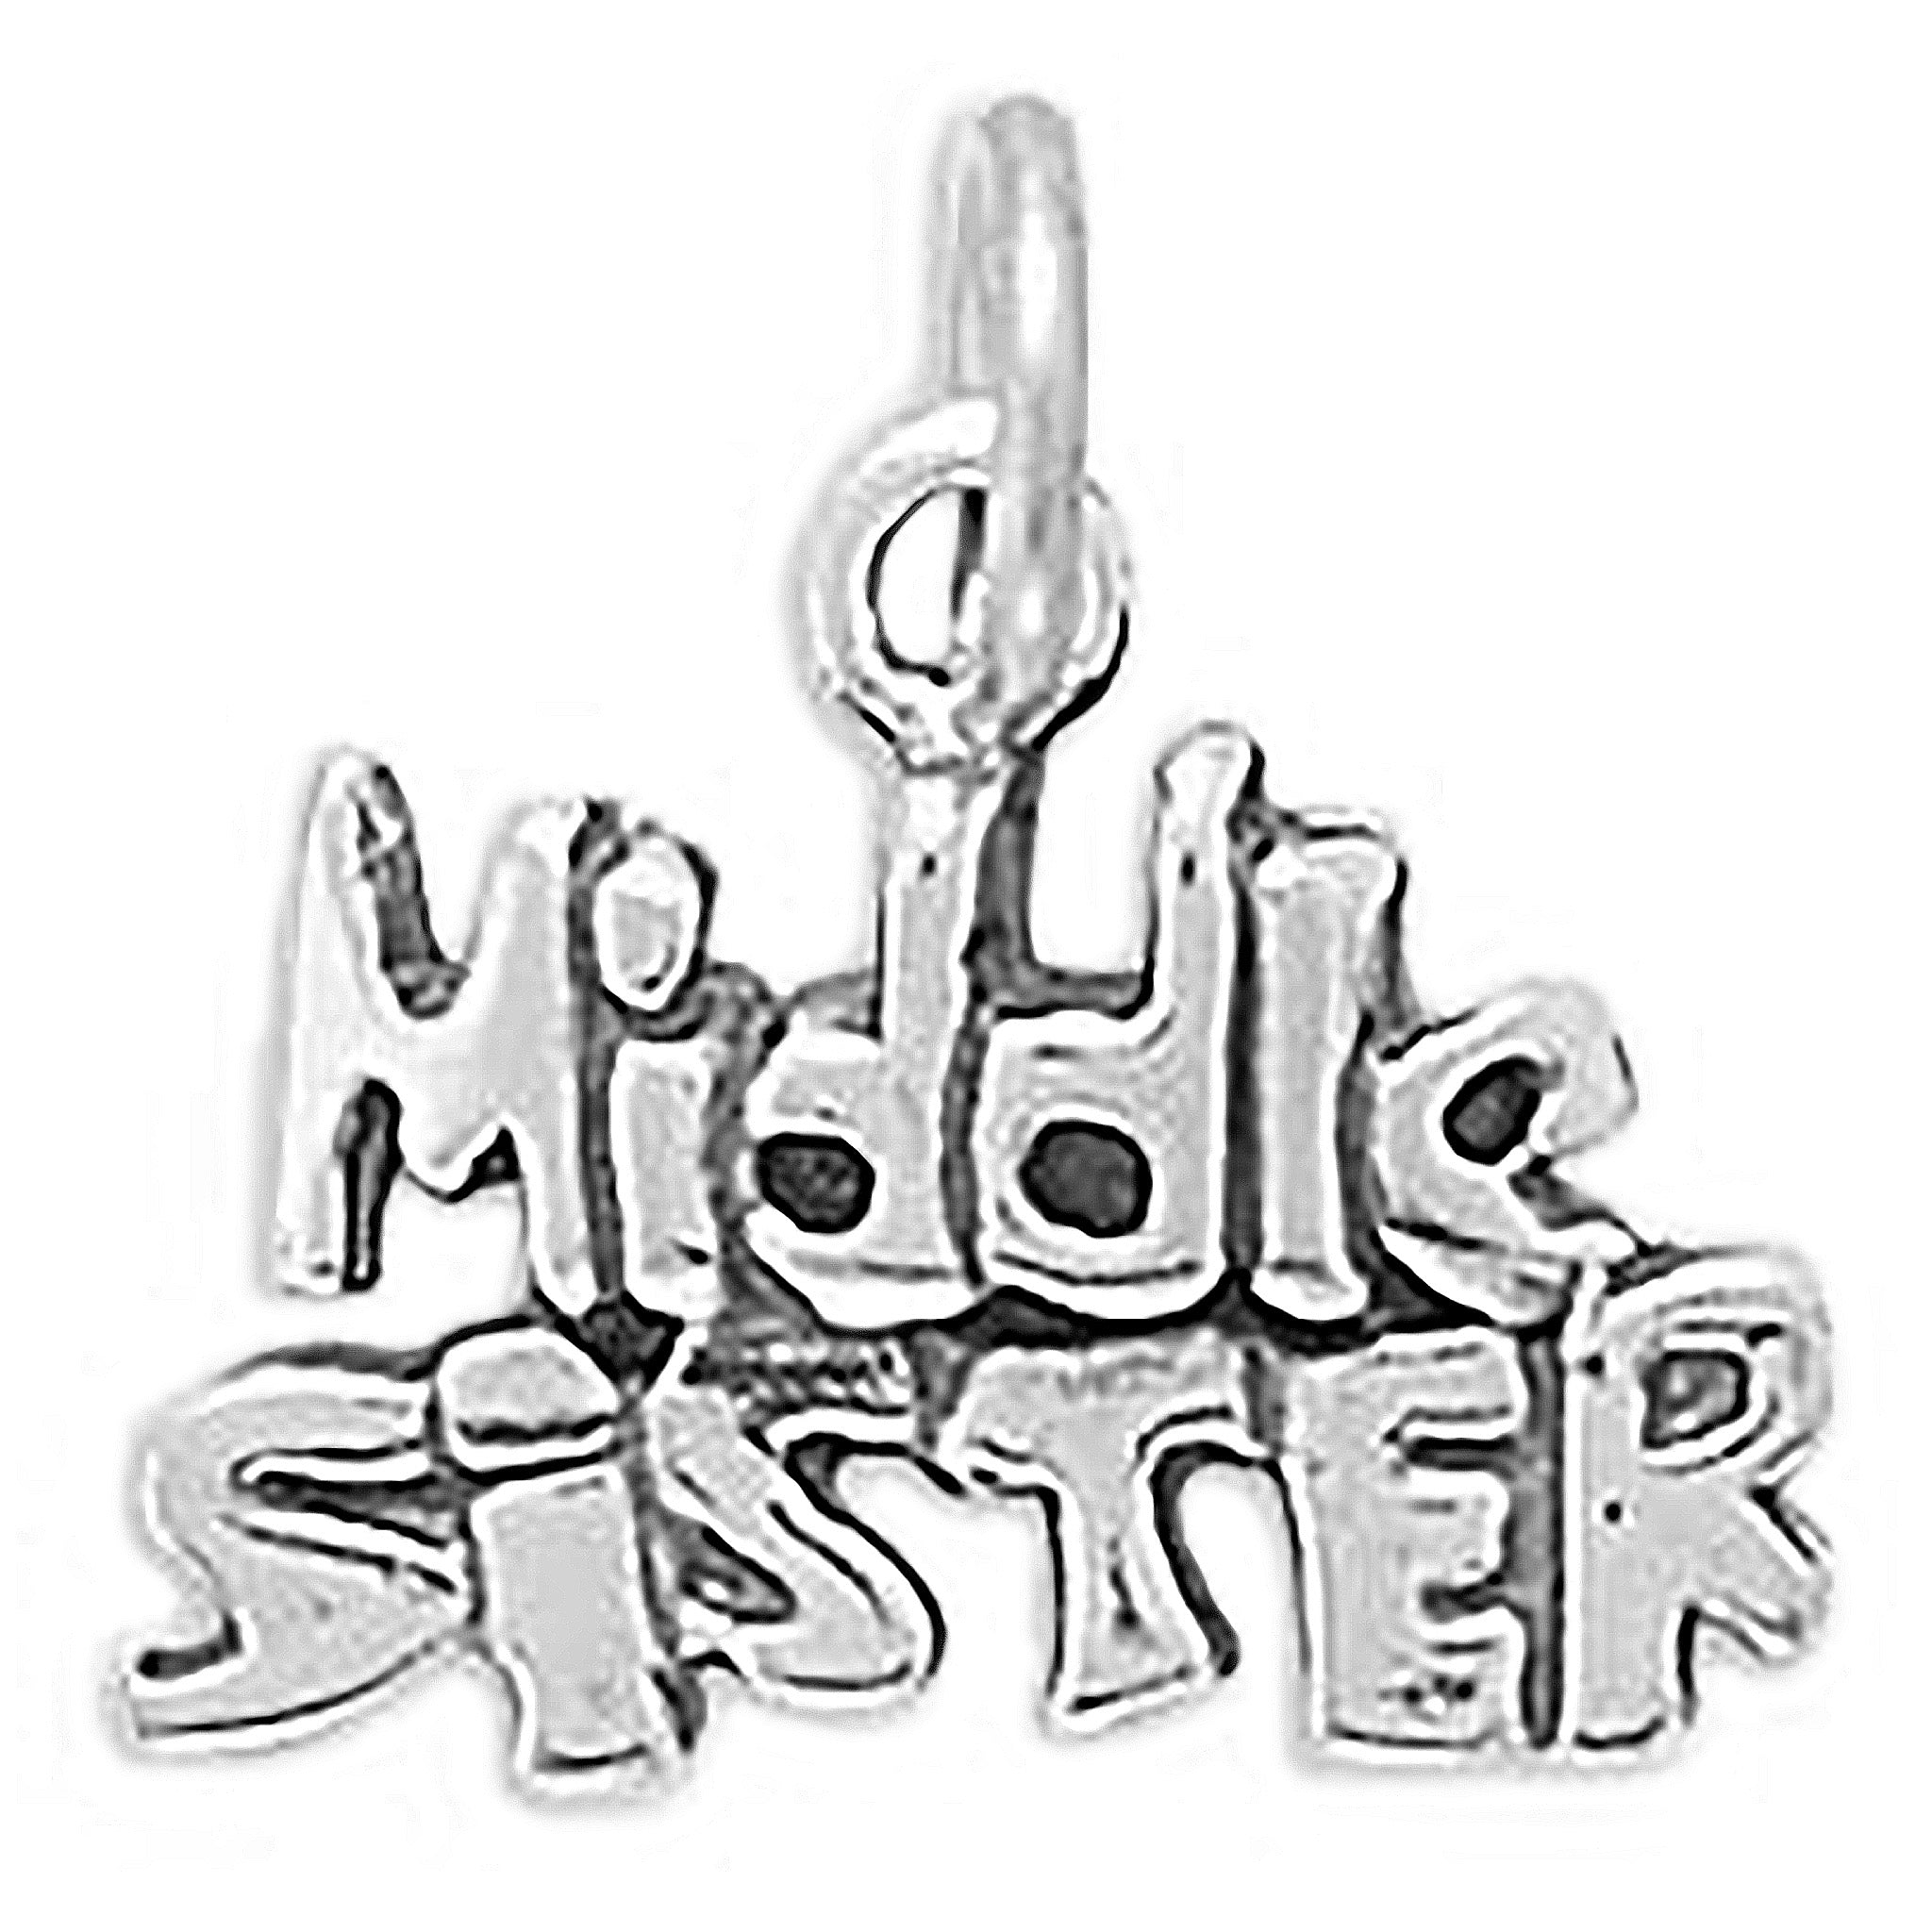 Middle Sister Charm